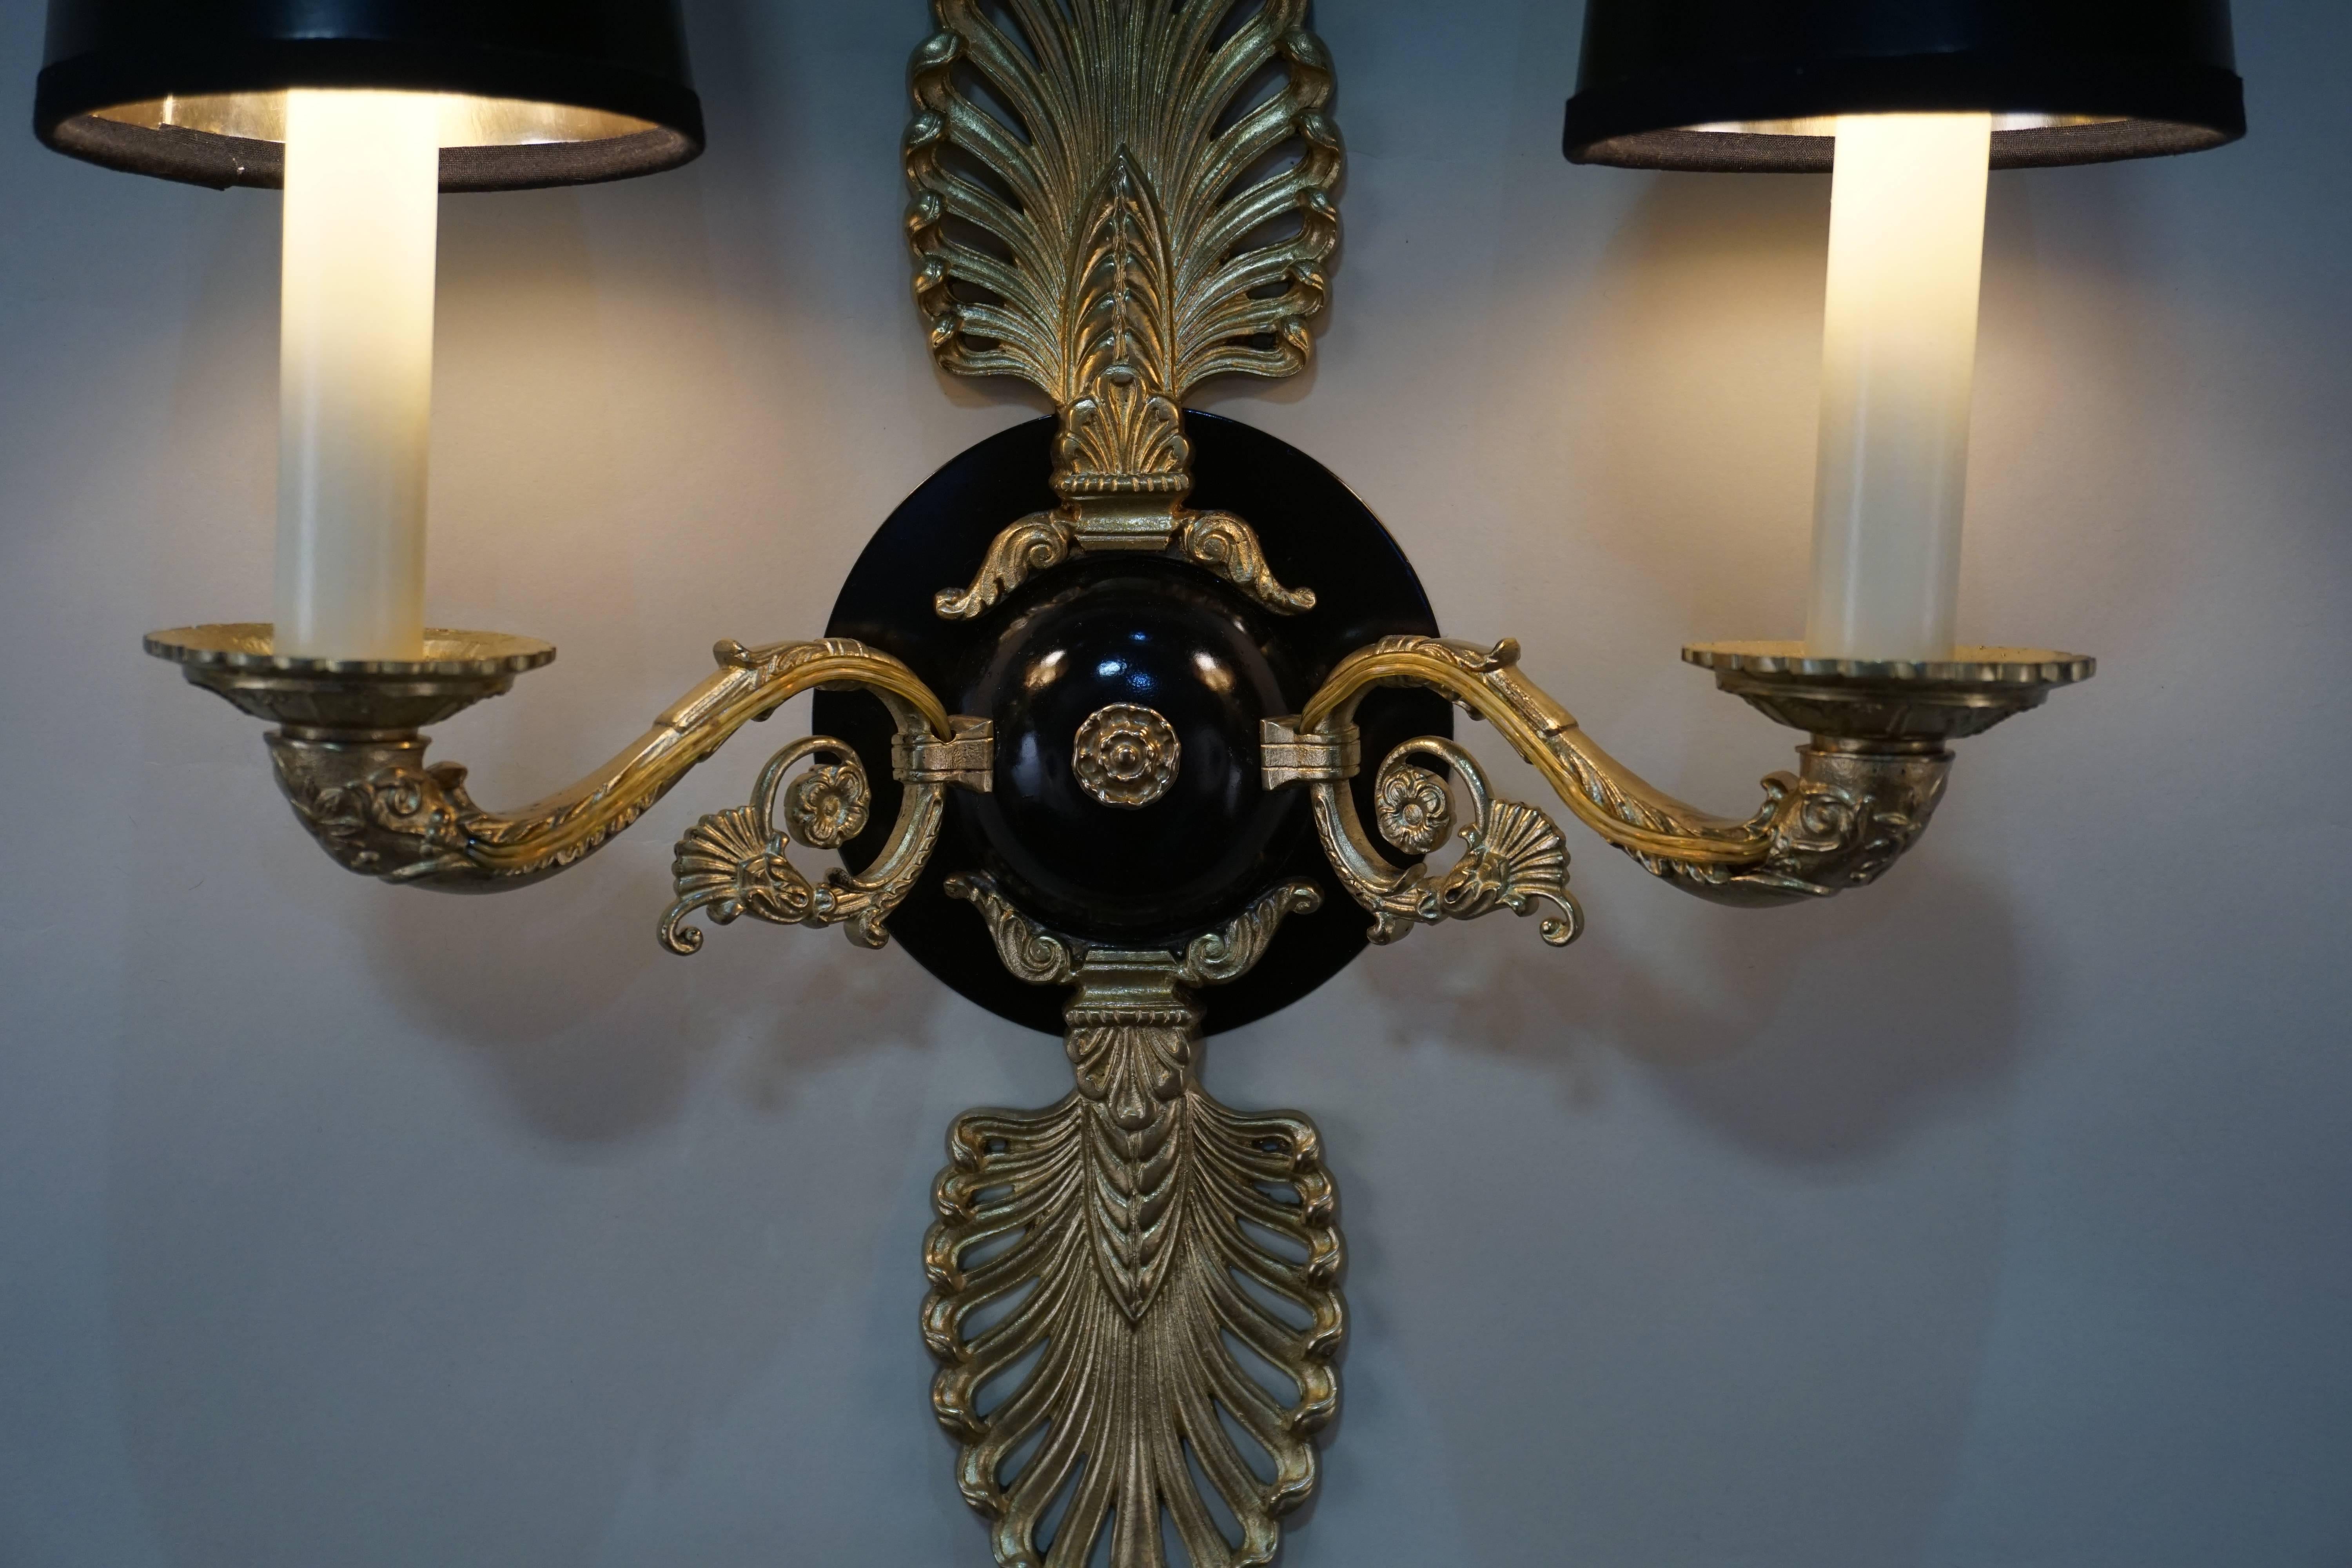 A wonderful pair of double arm wall sconces. Made in France during the early 30th century, the sconces feature a Classic Empire style design. The beautiful bronze work is filled with intricate detail and craftsmanship. The black lacquer centre gives